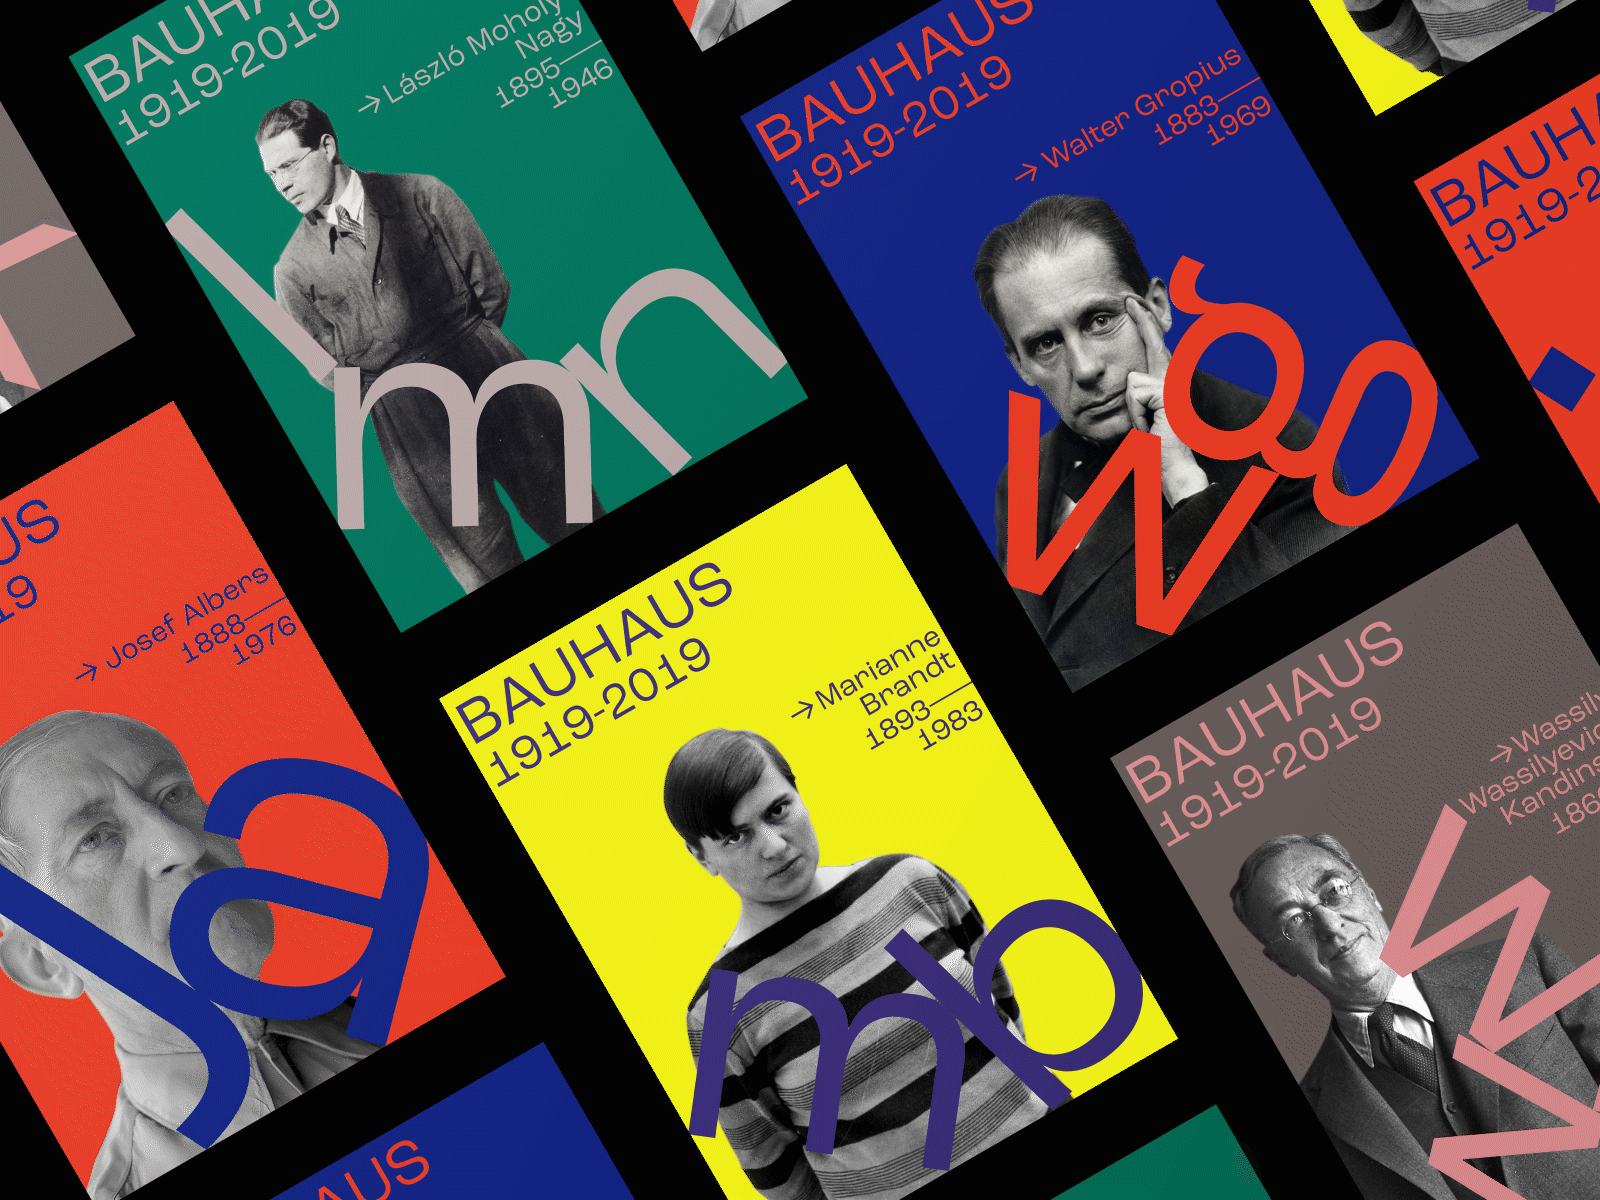 From Dessau with Love! Another Poster Series for Bauhaus bauhaus bauhaus100 josef albers marianne brandt moholy-nagy poster poster a day poster challenge poster collection poster design walter gropius wassily kandinsky